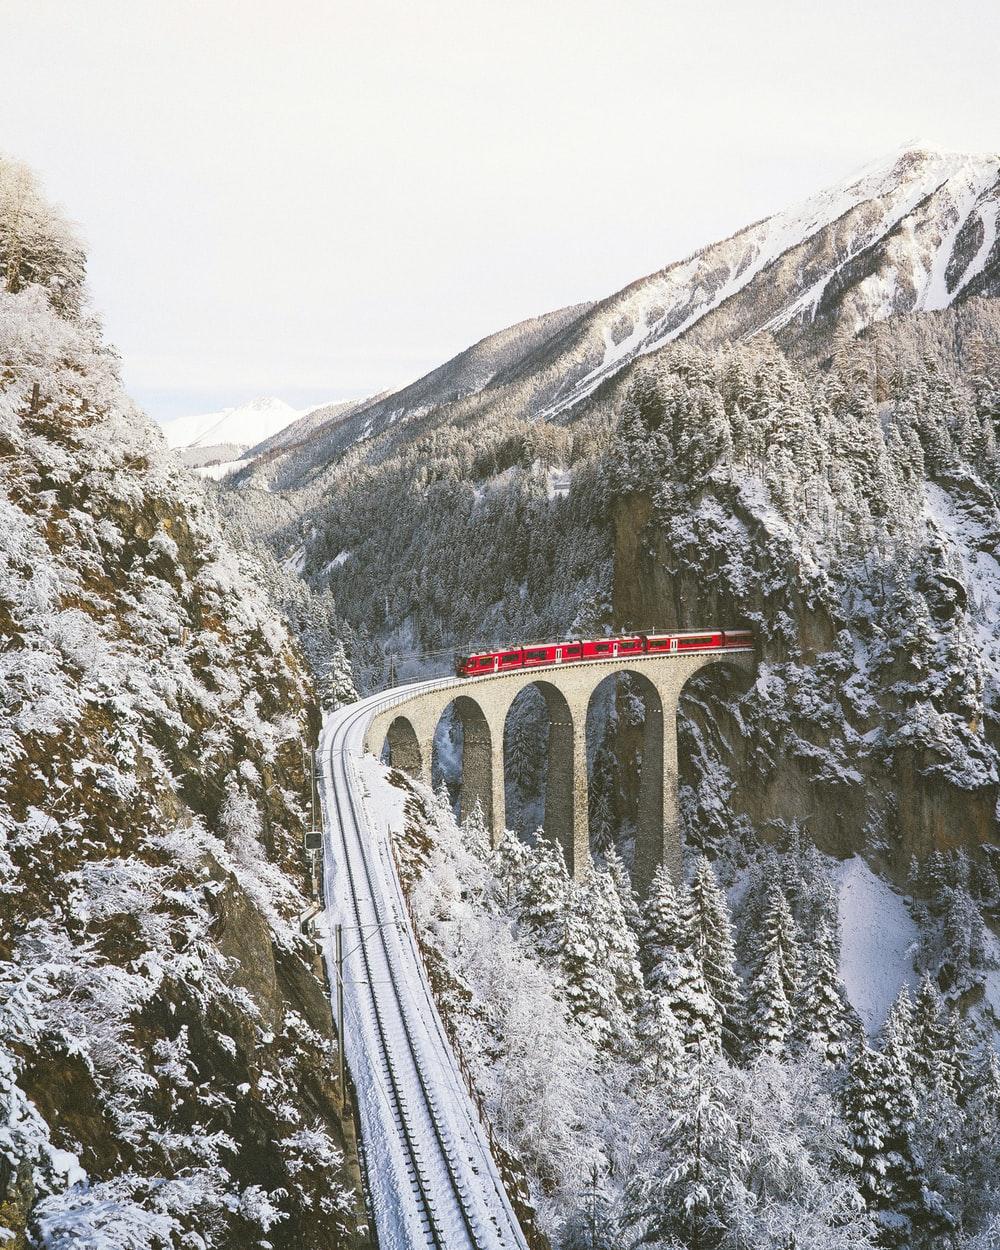 approaching red train across mountains photo